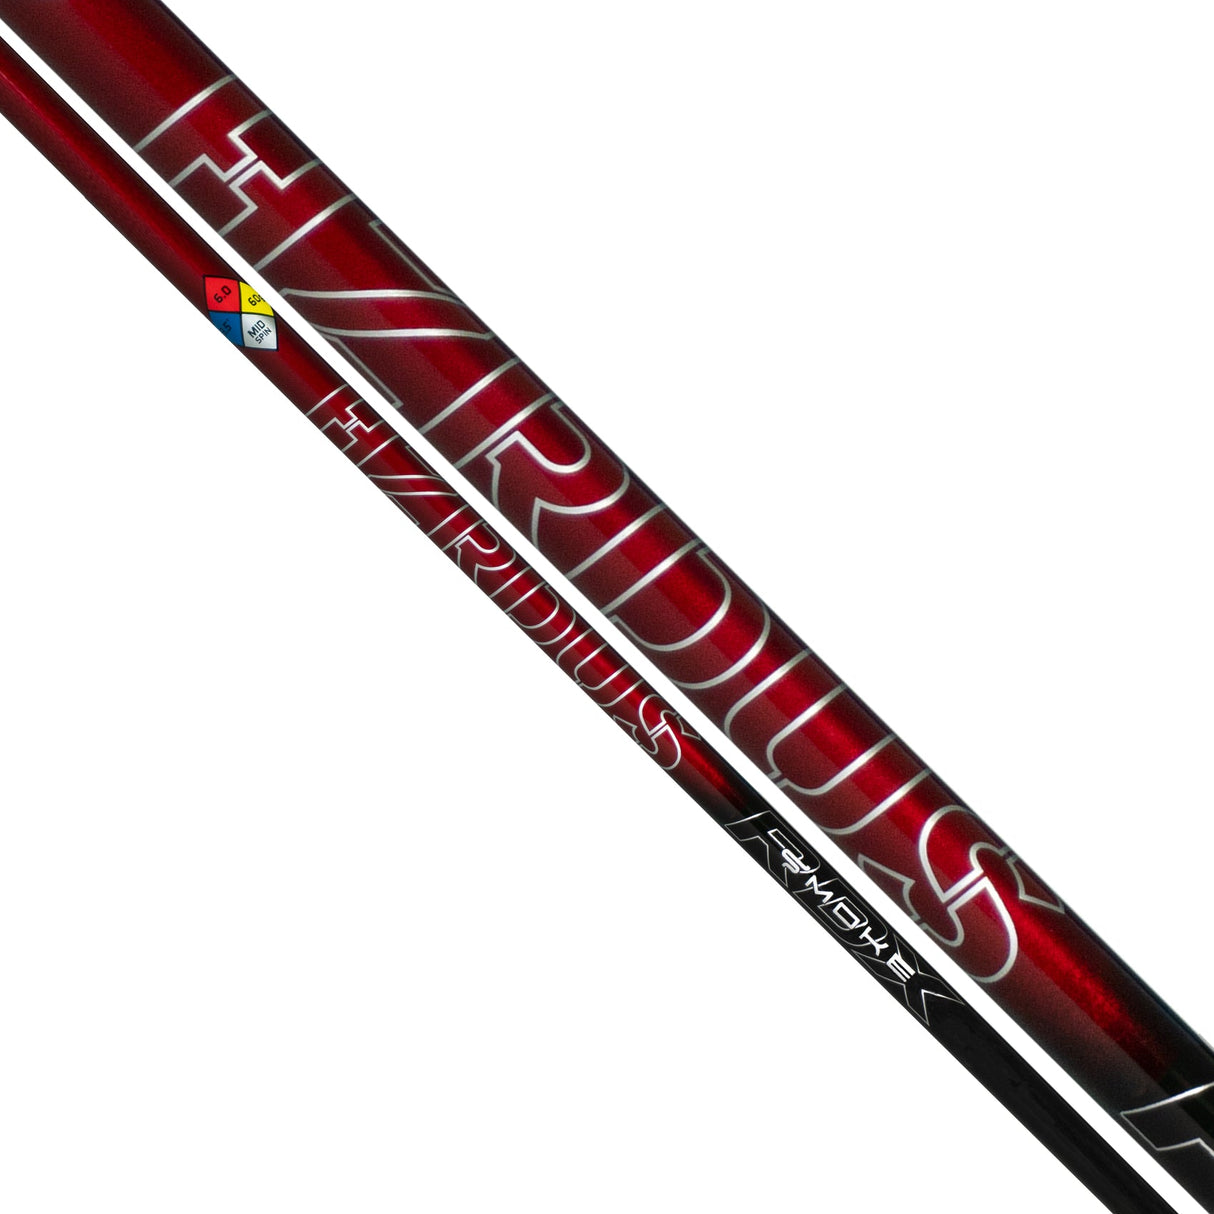 (Assembled) Project X Hzrdus Smoke Red RDX Hybrid Shaft with Adapter Tip + Grip